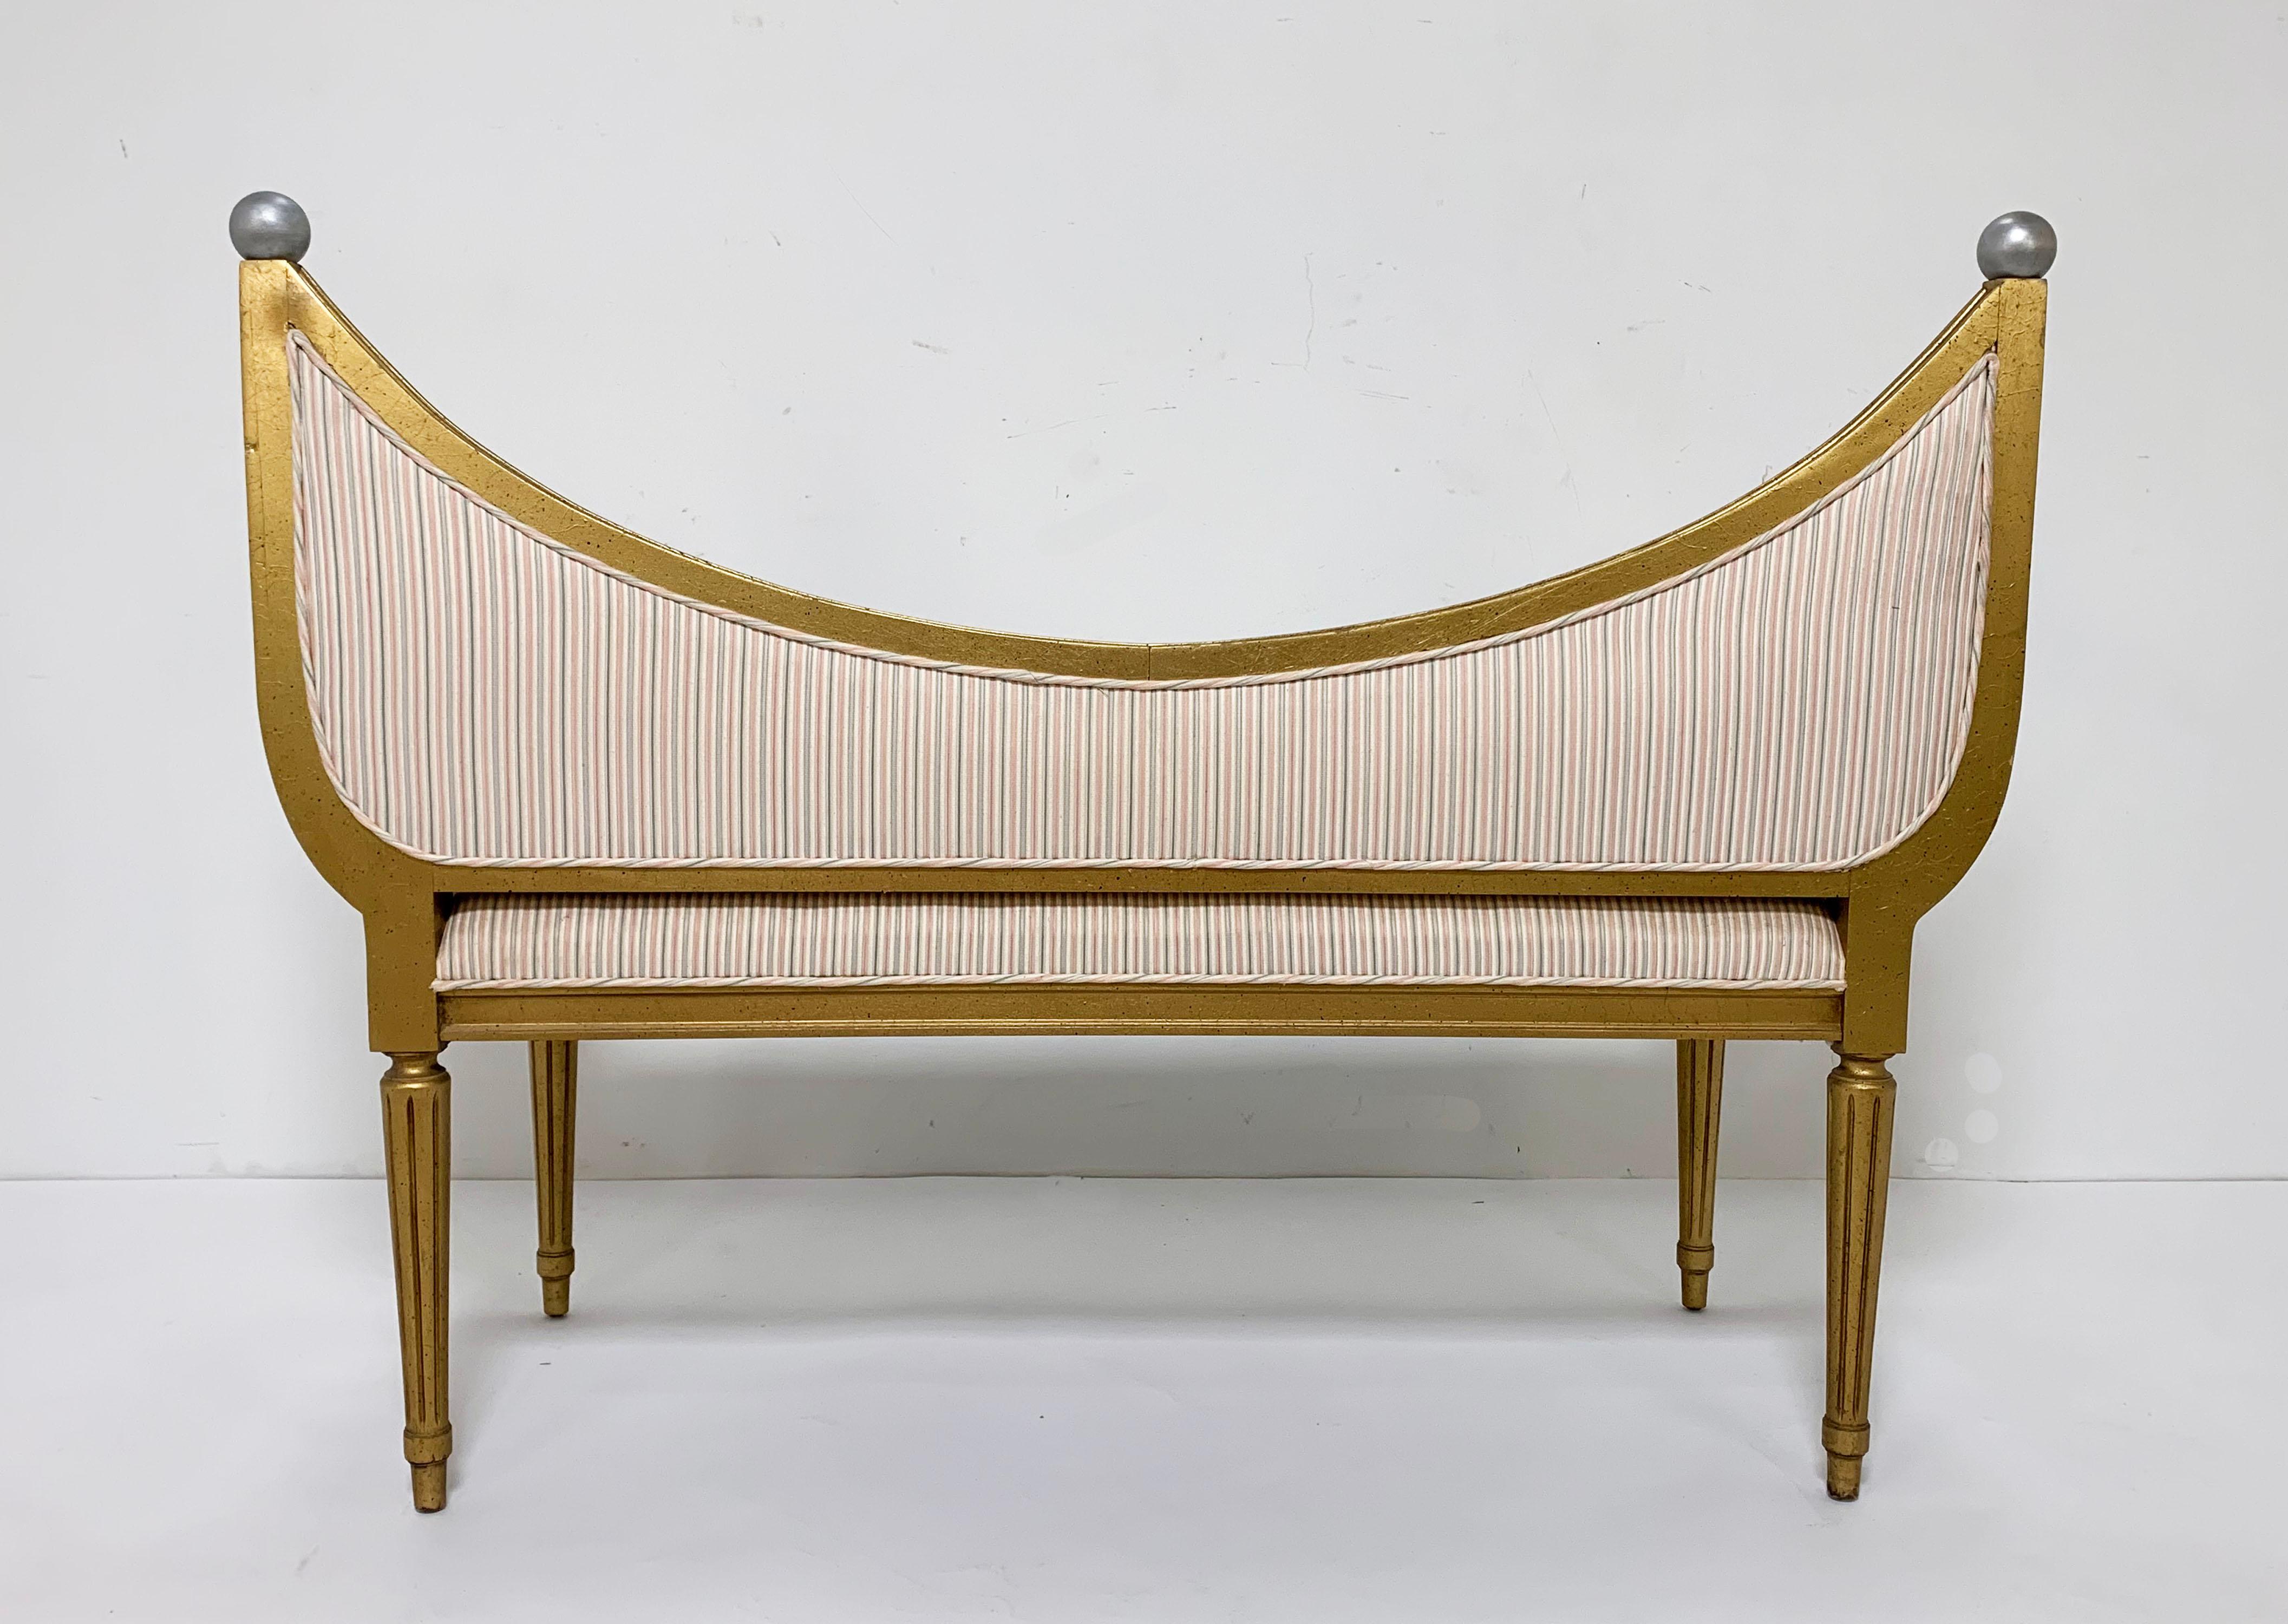 Midcentury Giltwood Settee Bench in the Neoclassical Style, circa 1960s 2